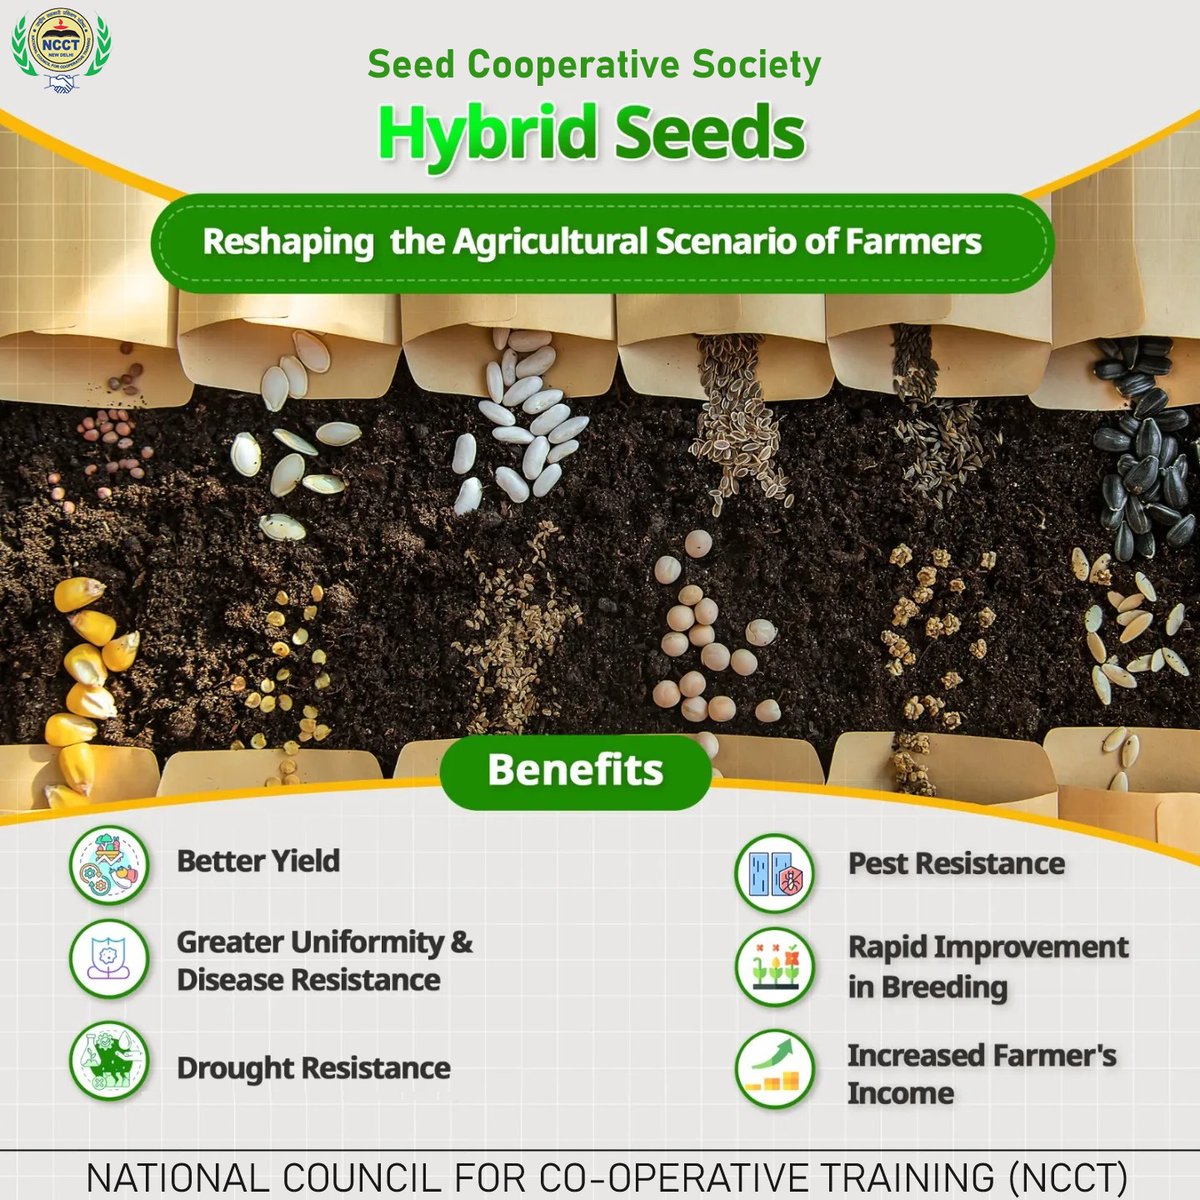 Seed Cooperative Society,
Hybrid Seeds offer improved yields, natural resilience, consistency, and performance benefits increasing overall crop productivity and enhancing farmers' income. 
#seed #farming #NCCT #सहकारसेसमृद्धि #society #SahakarSeSamriddhi #cooperativeSociety